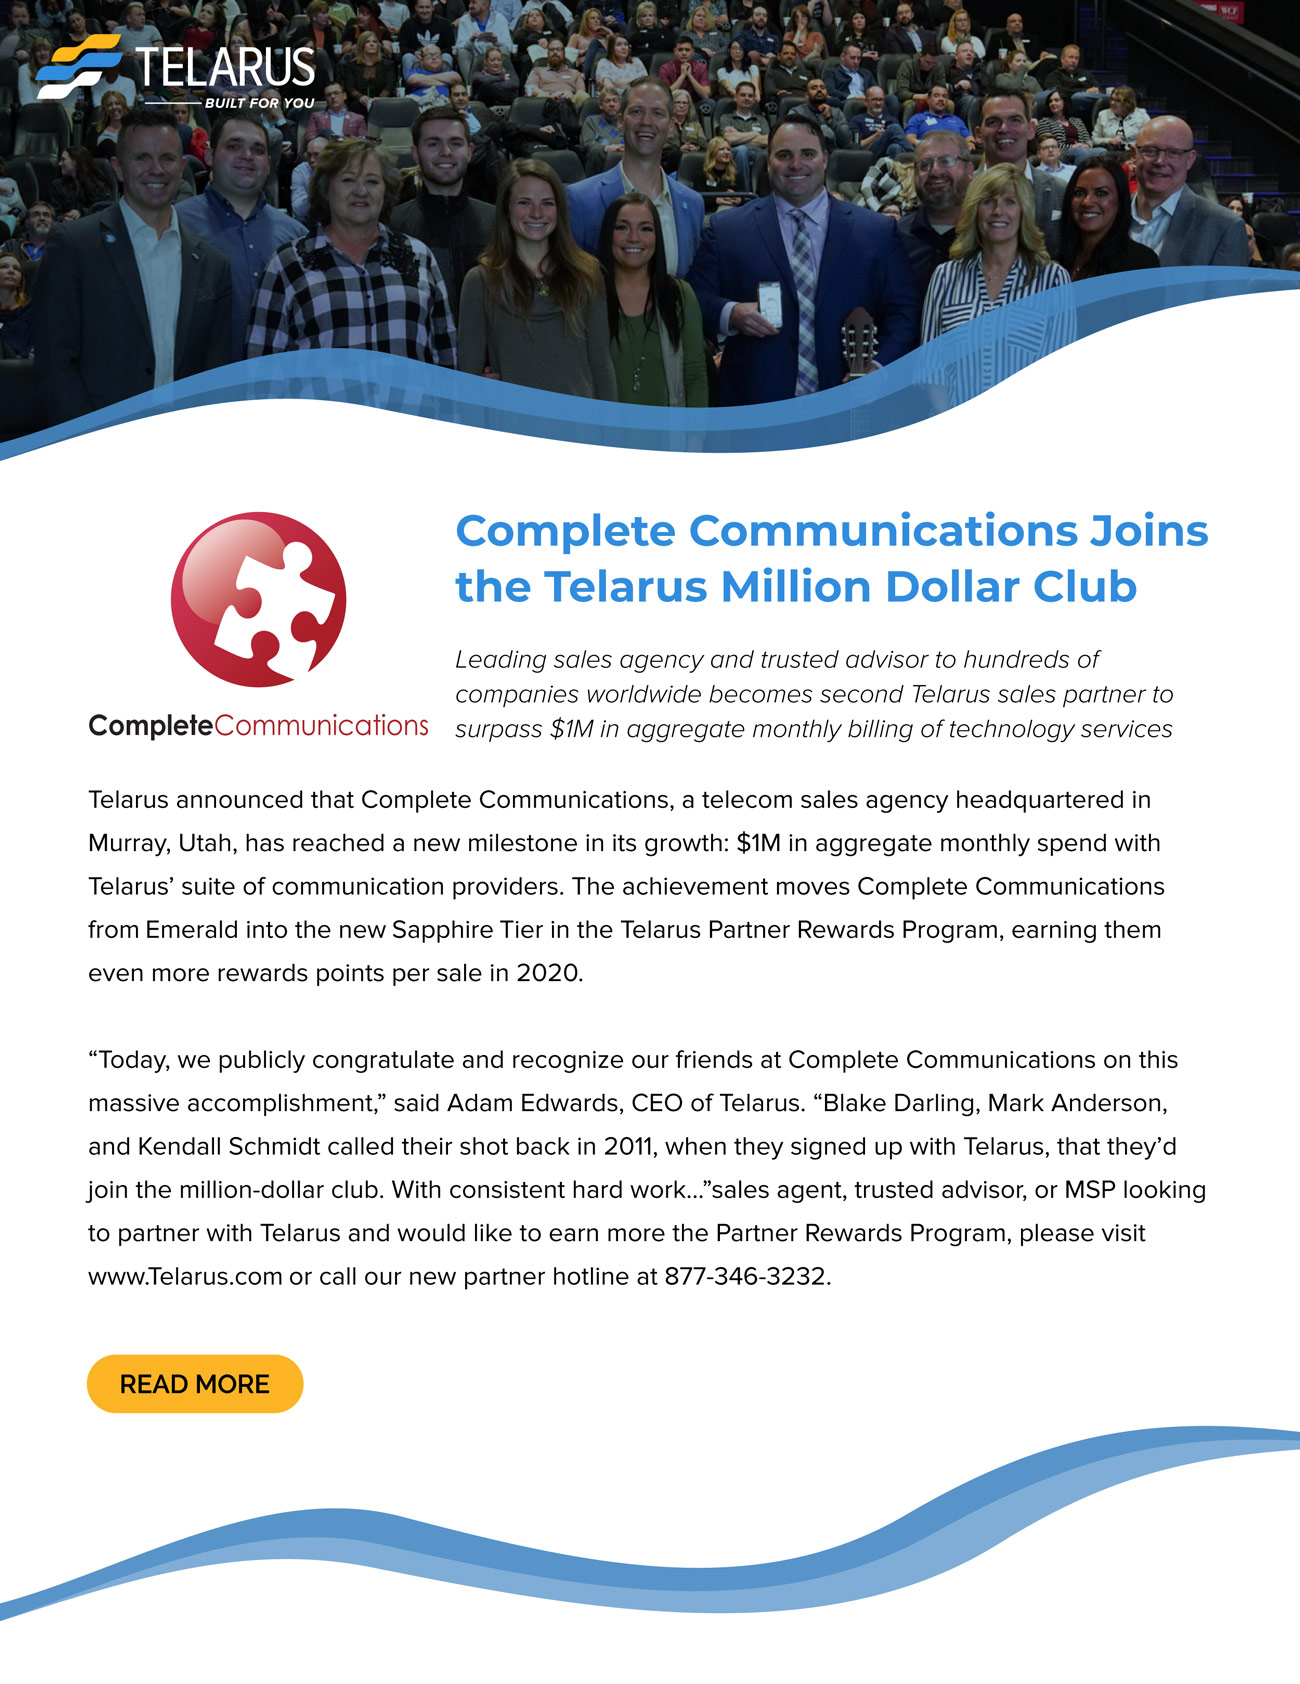 Complete Communications Joins the Telarus Million Dollar Club